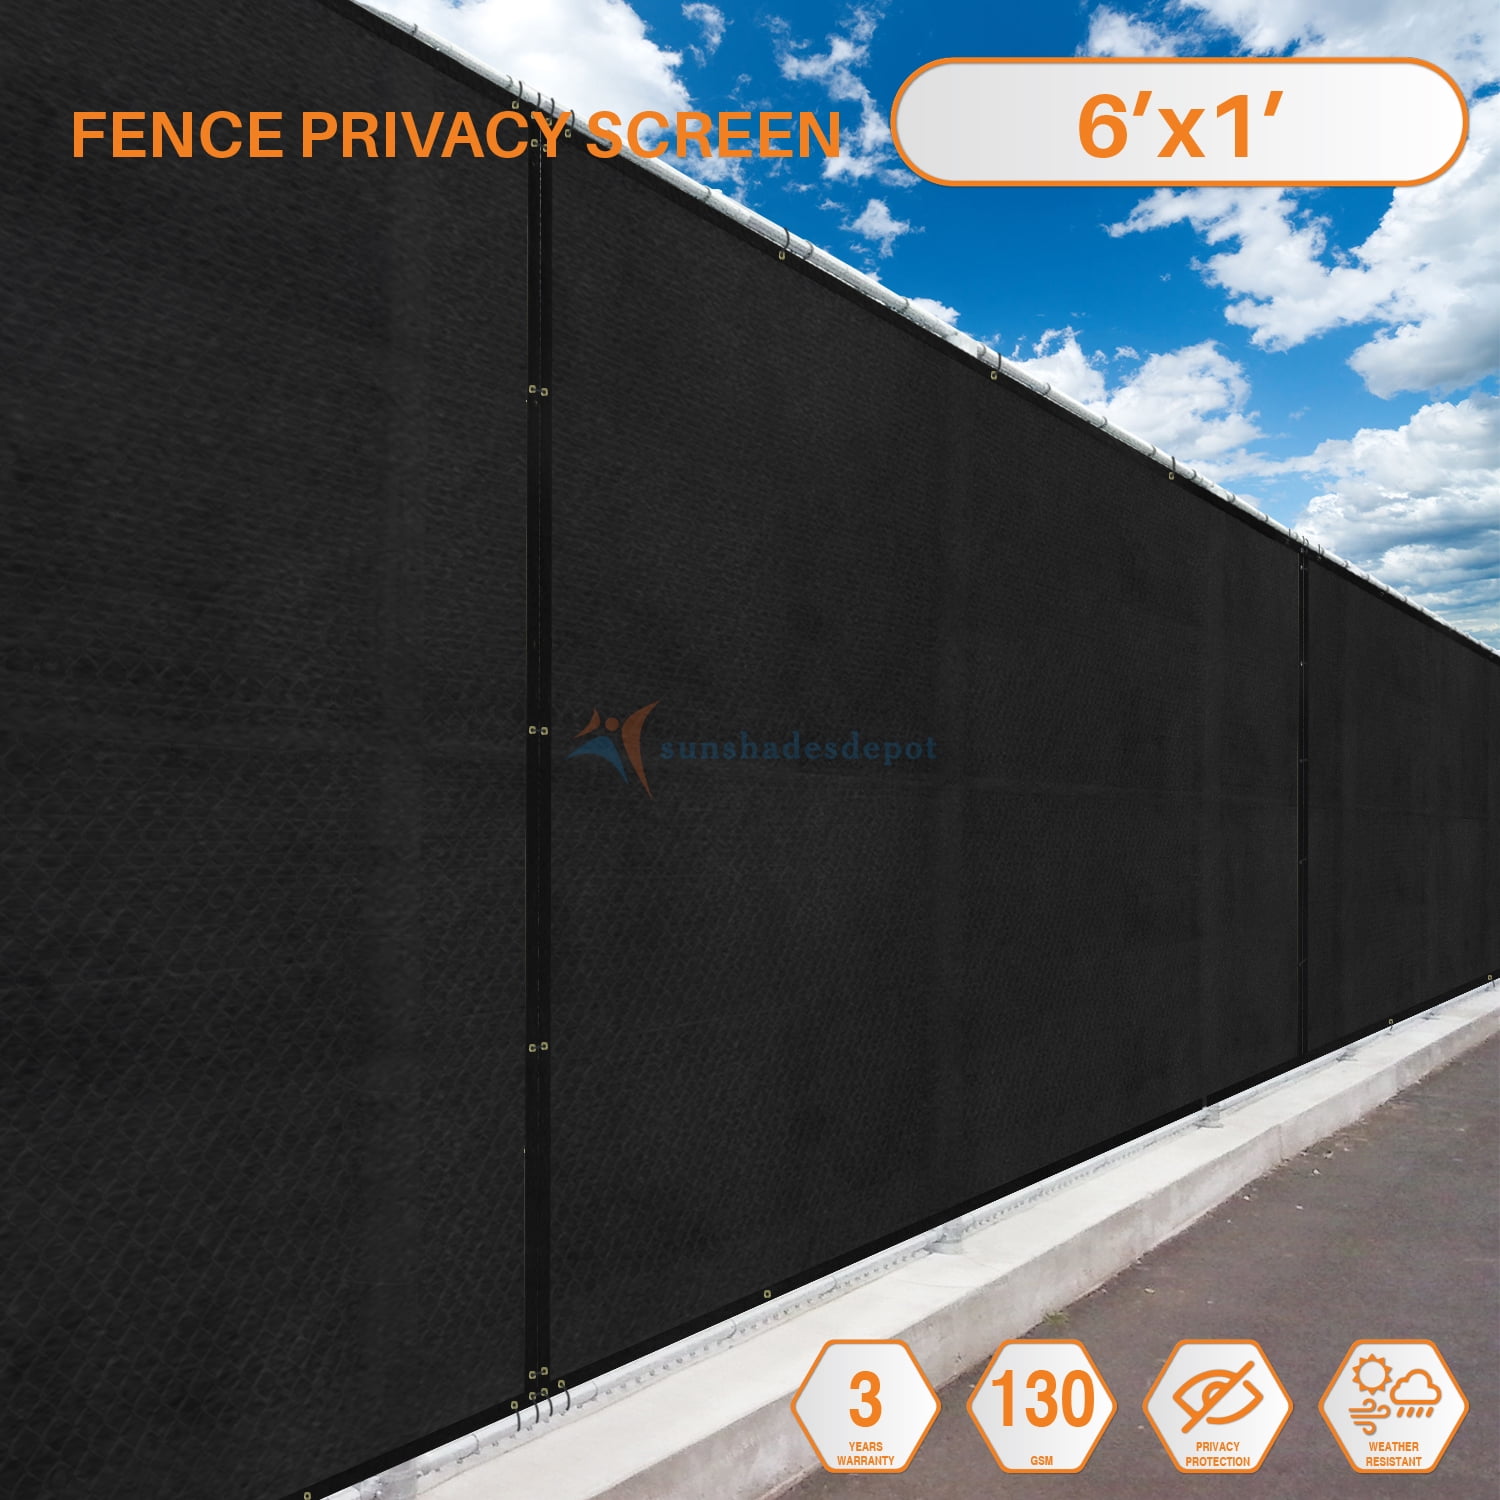 Customize 8'FT Privacy Screen Fence Black Commercial Windscreen Shade Cover1-160 